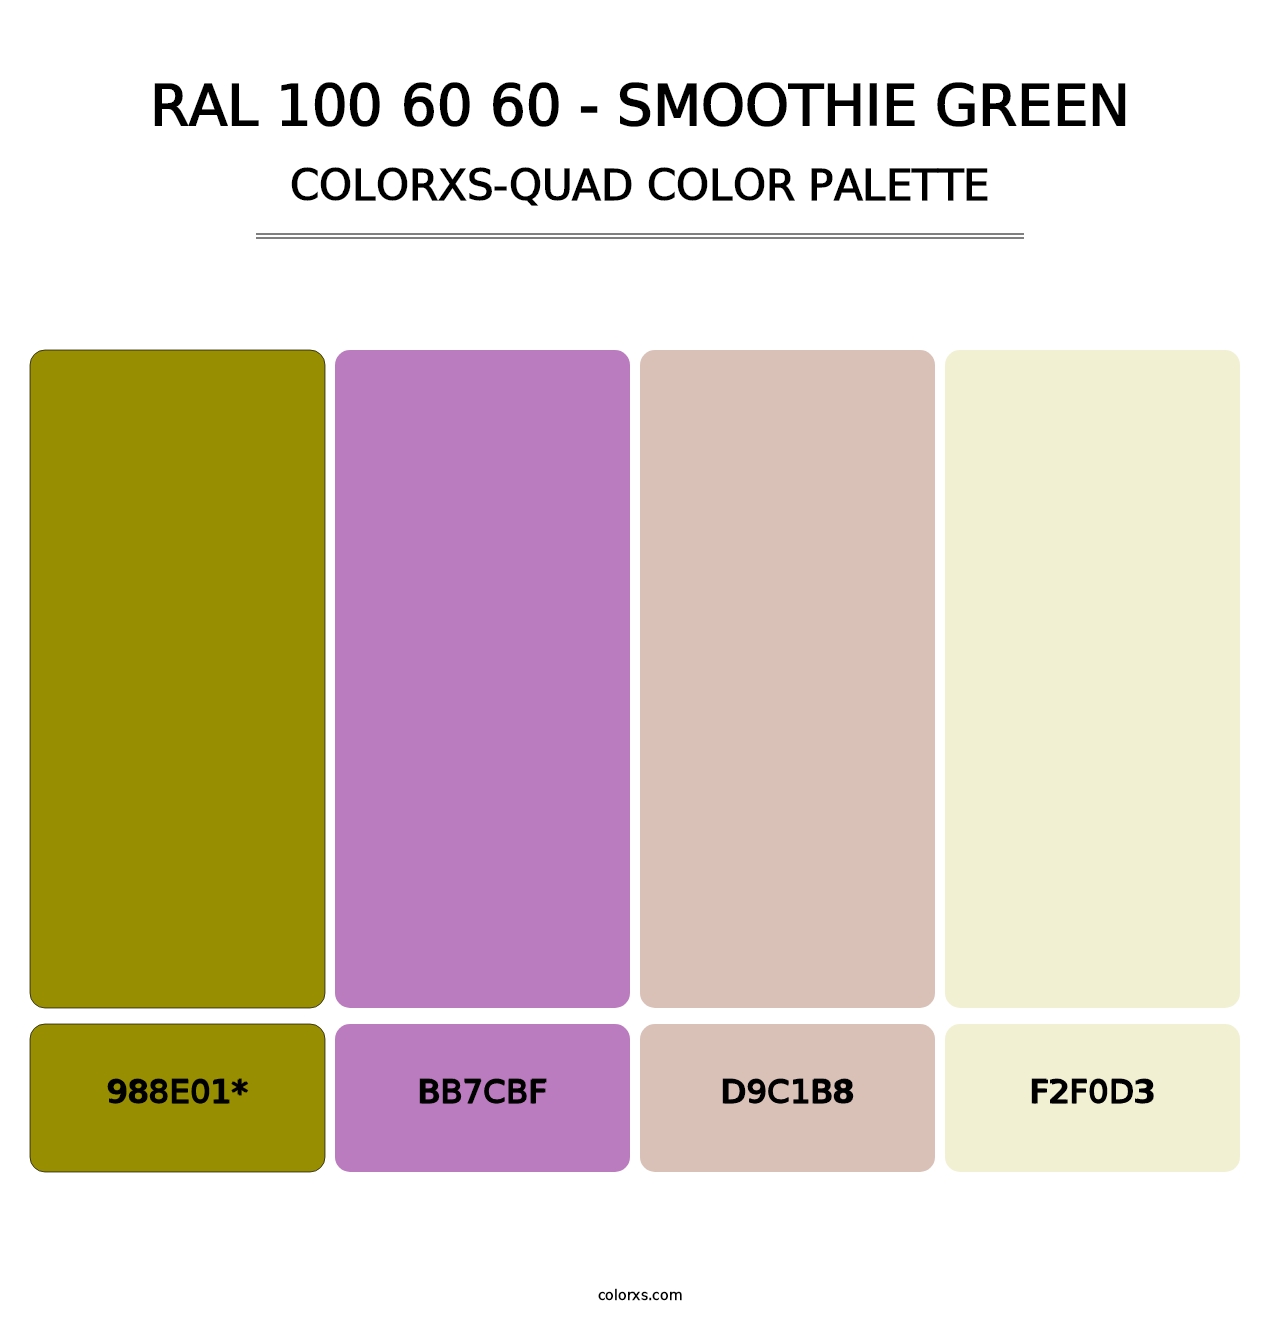 RAL 100 60 60 - Smoothie Green - Colorxs Quad Palette